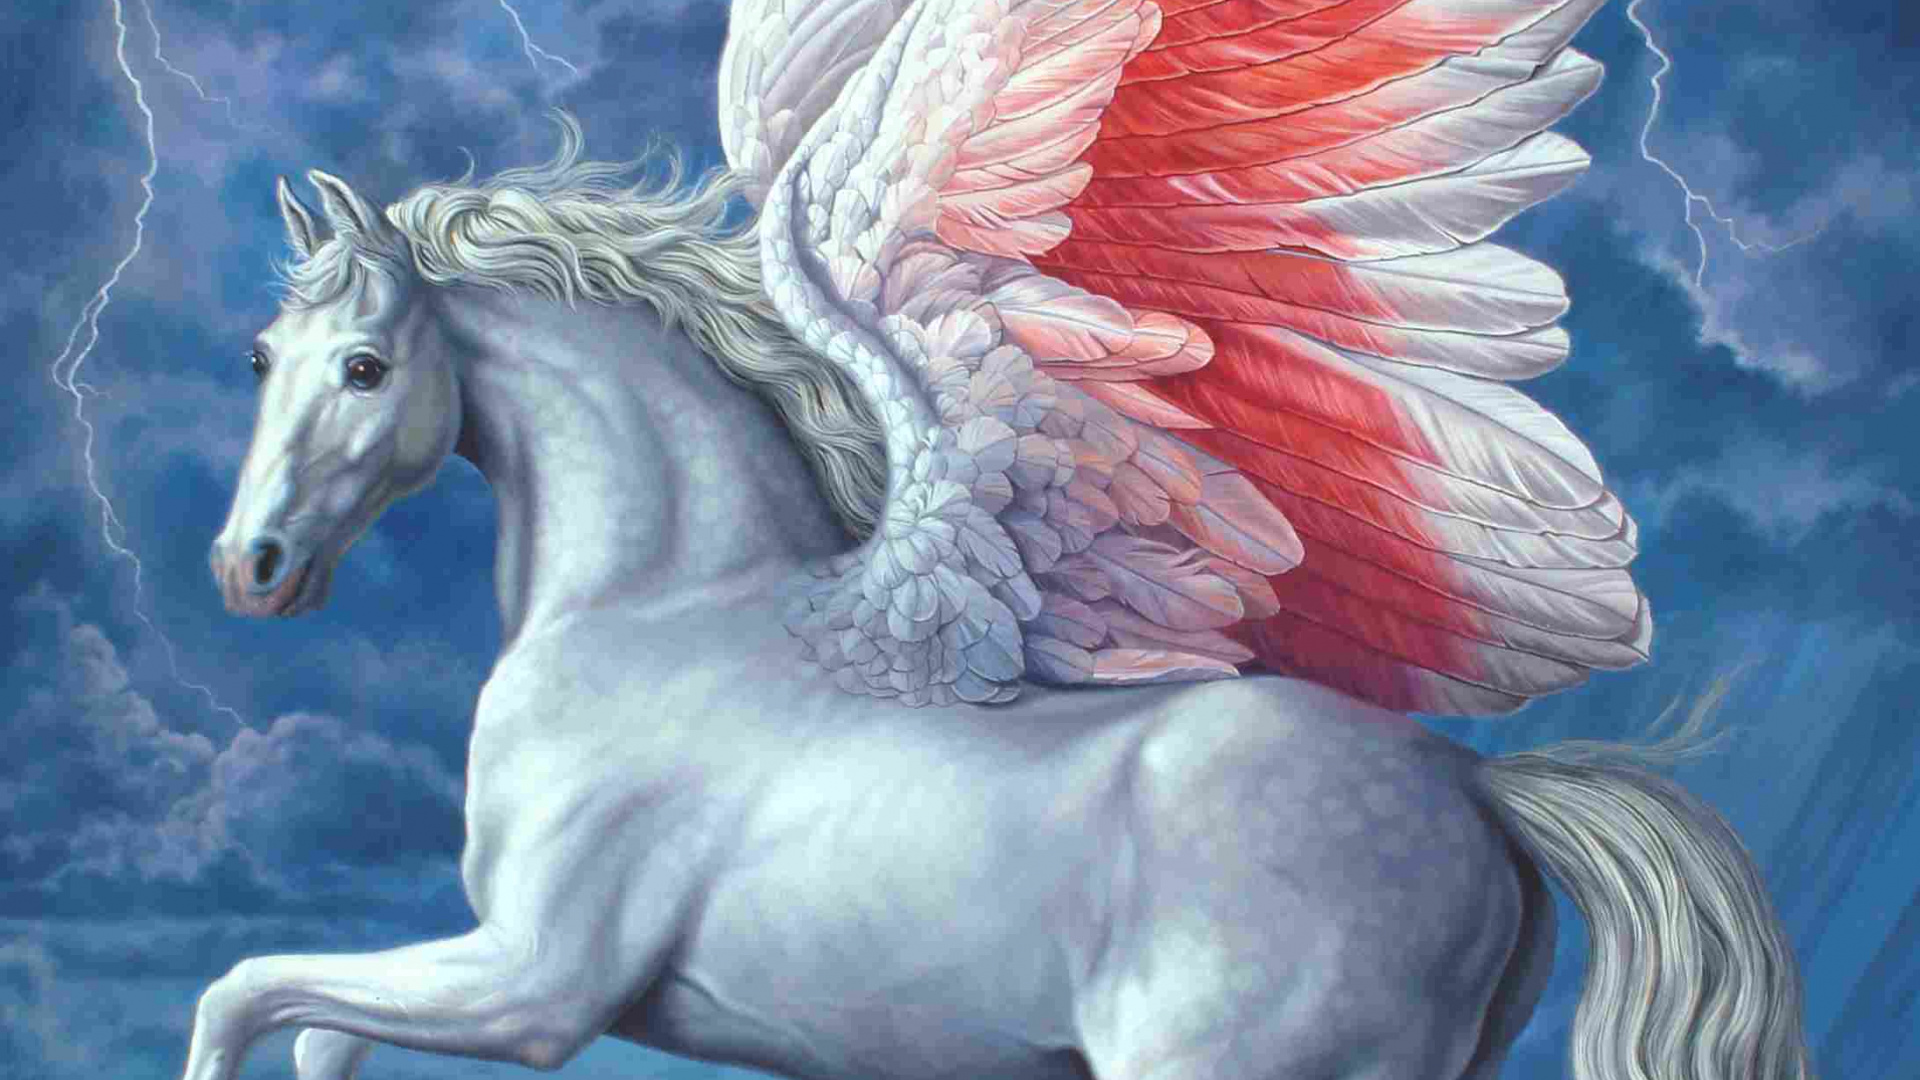 White Horse With Red Wings Painting. Wallpaper in 1920x1080 Resolution